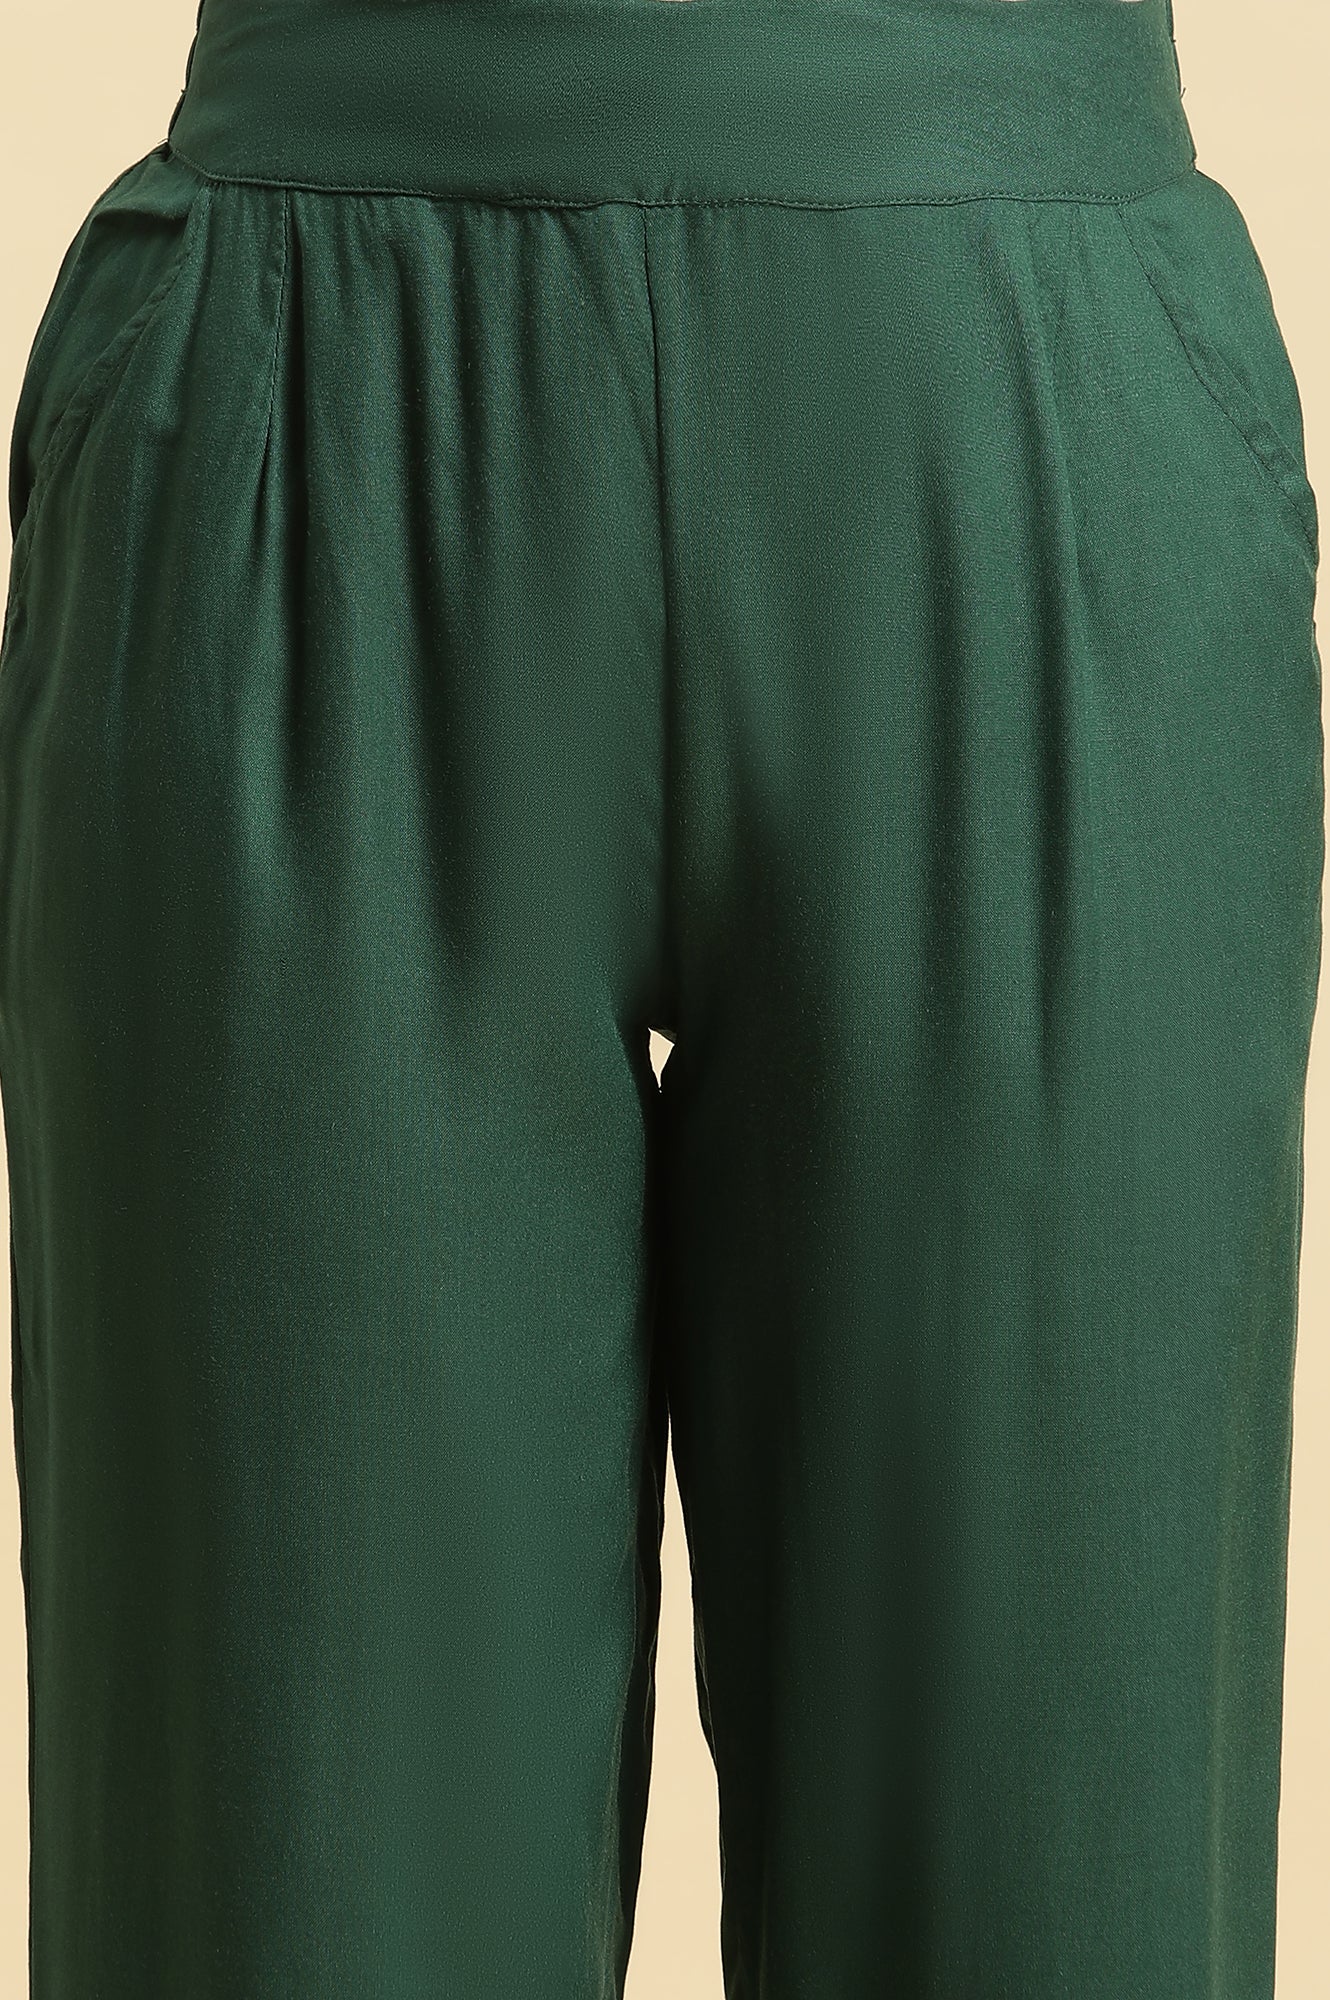 Green Embroidered Straight Pants